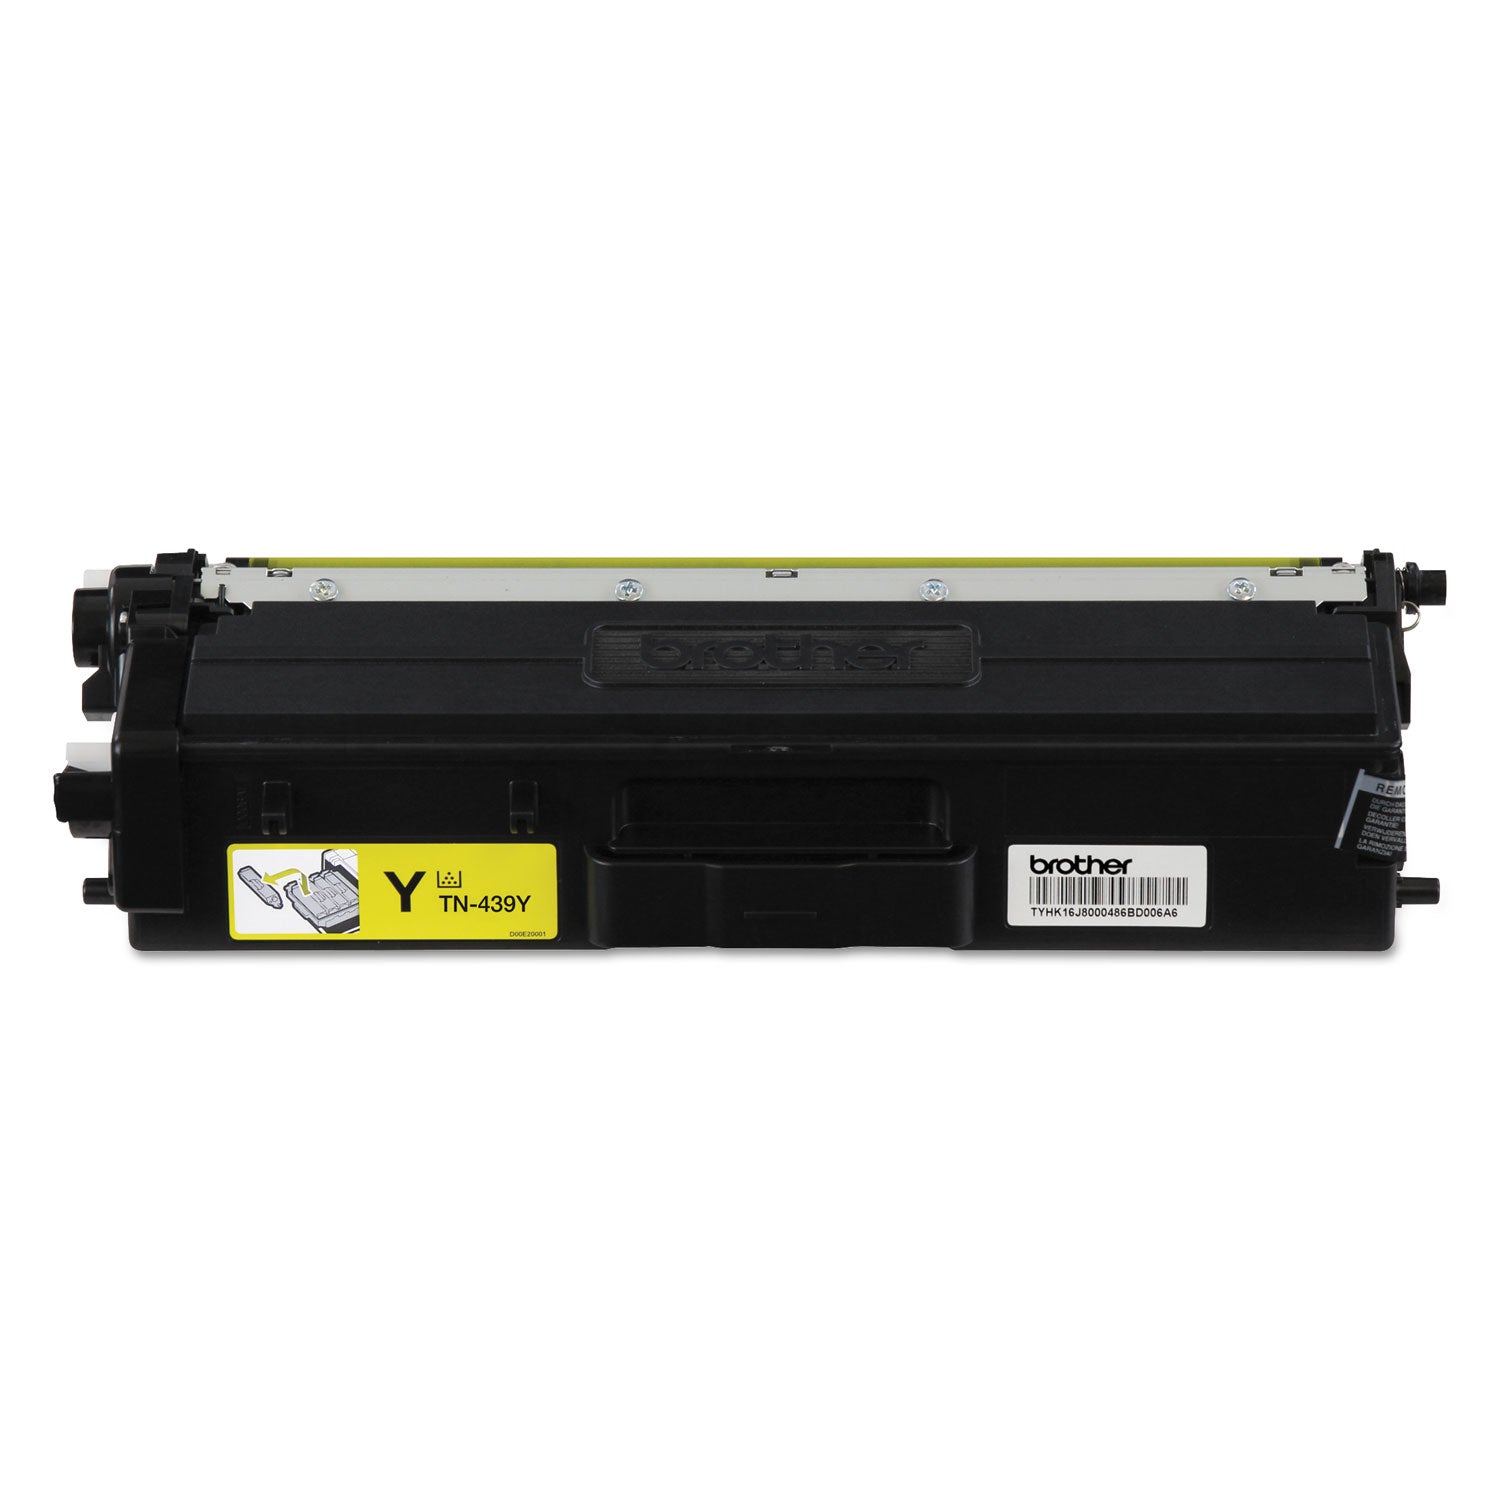 Brother TN439Y Original Ultra High Yield Laser Toner Cartridge - Yellow - 1 Each - 9000 Pages - 2